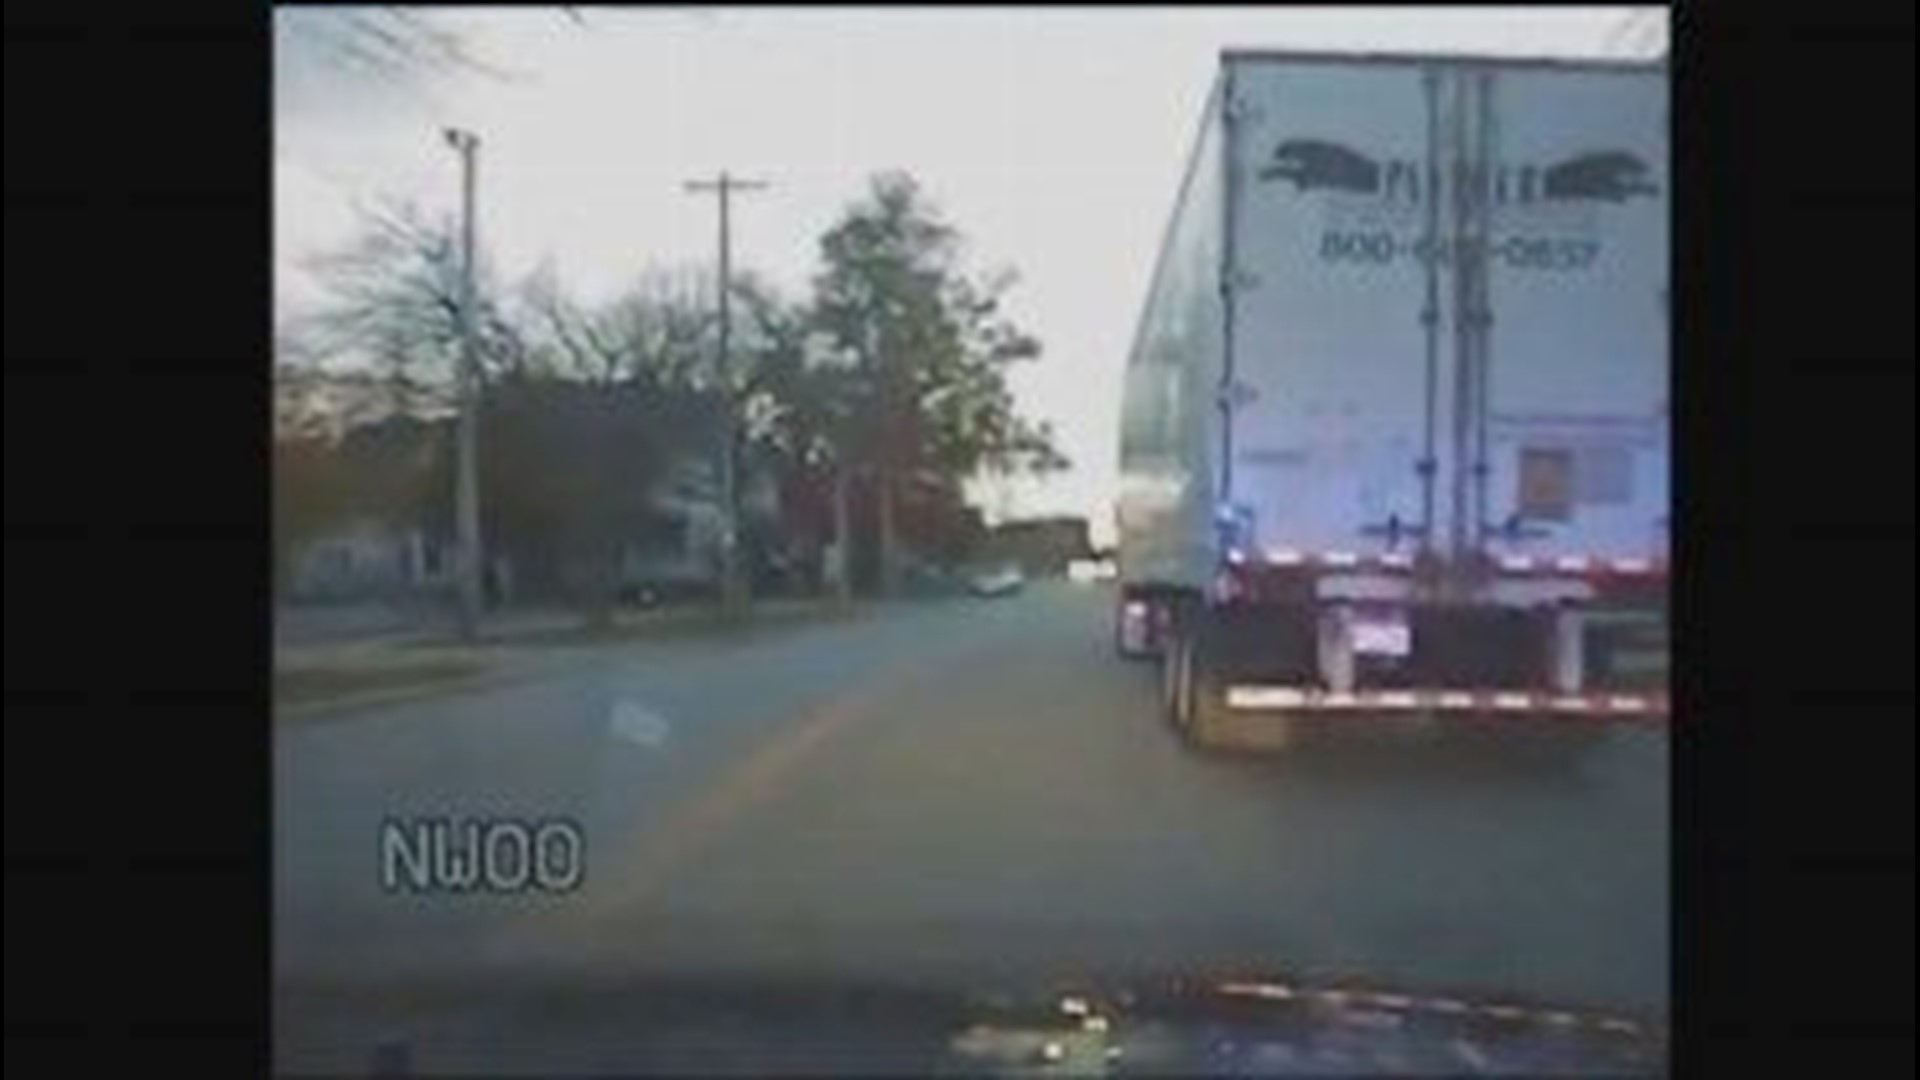 RAW: Driver leads police on 4-county chase in semi truck